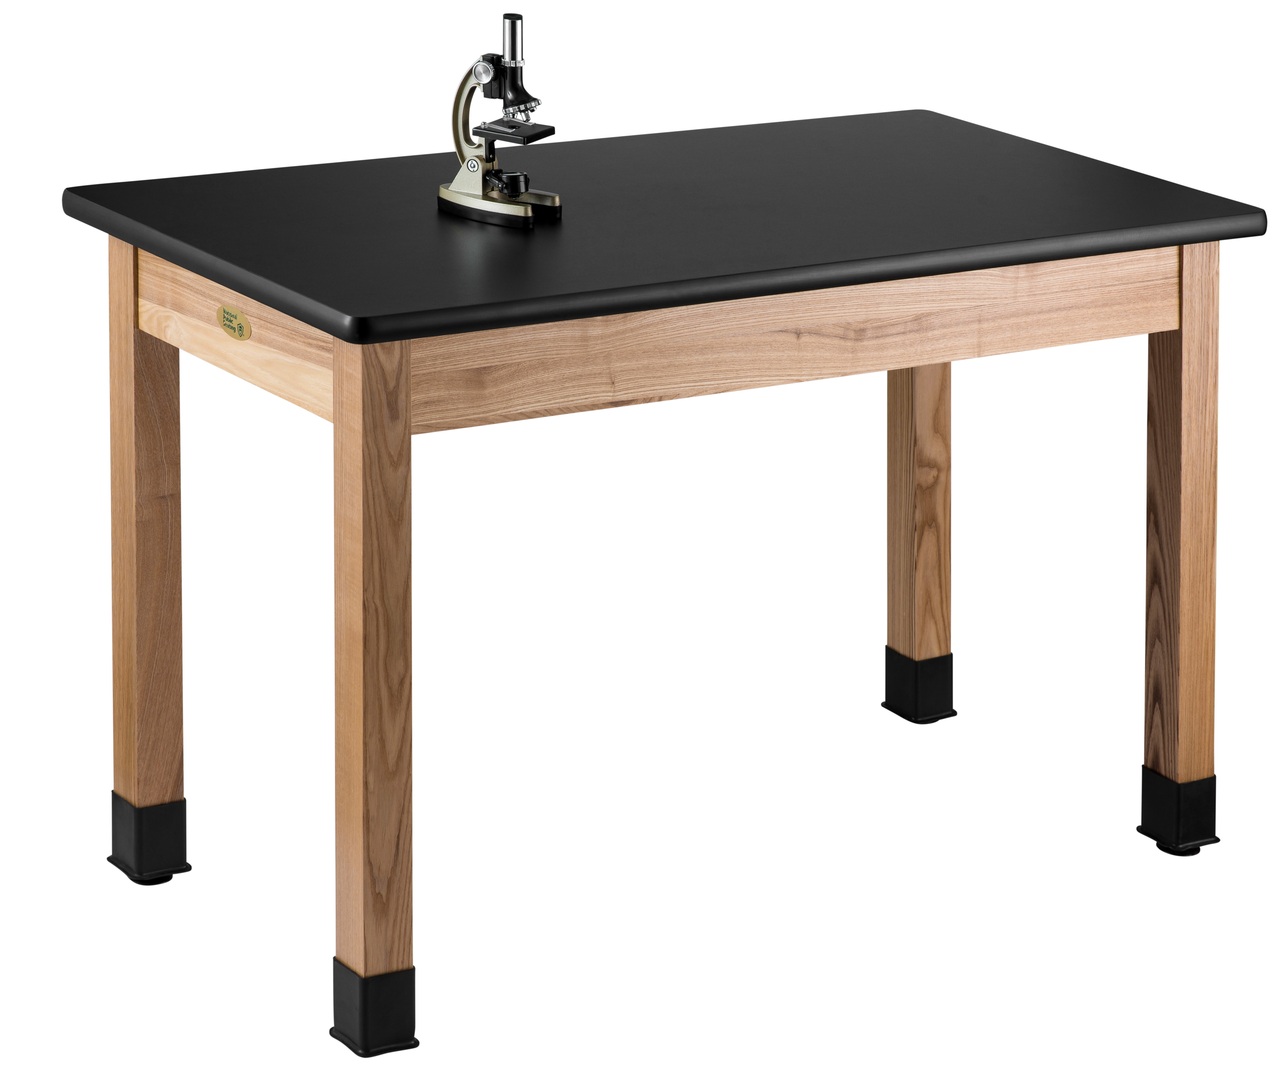 NPS Wood Science Lab Table -  42"x60"x30" -  HPL Top - Black Top and Ash Leg